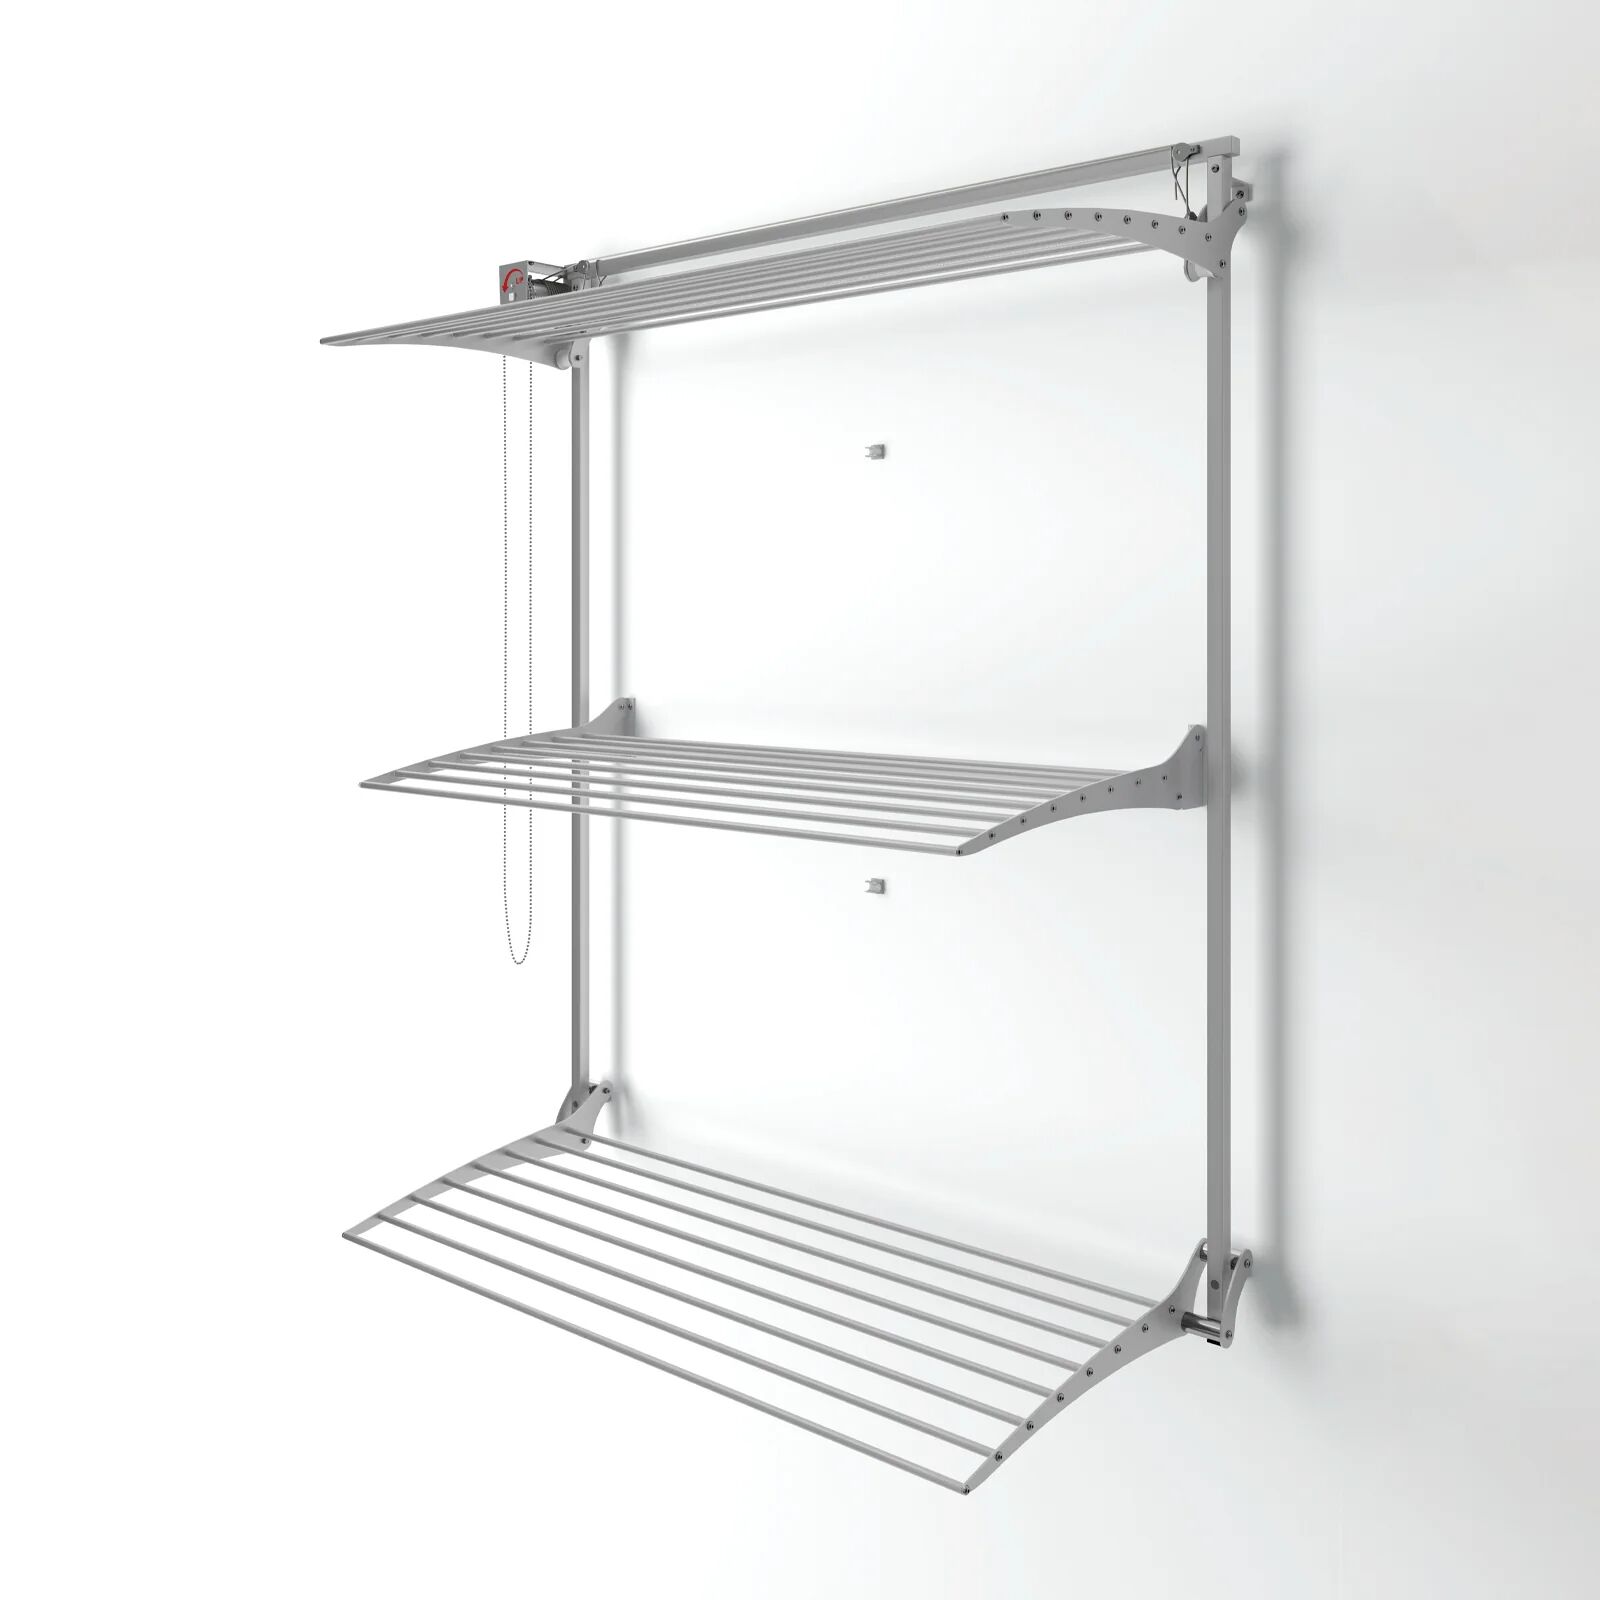 Foxydry Tower 120 tower clothes airer with foldable racks